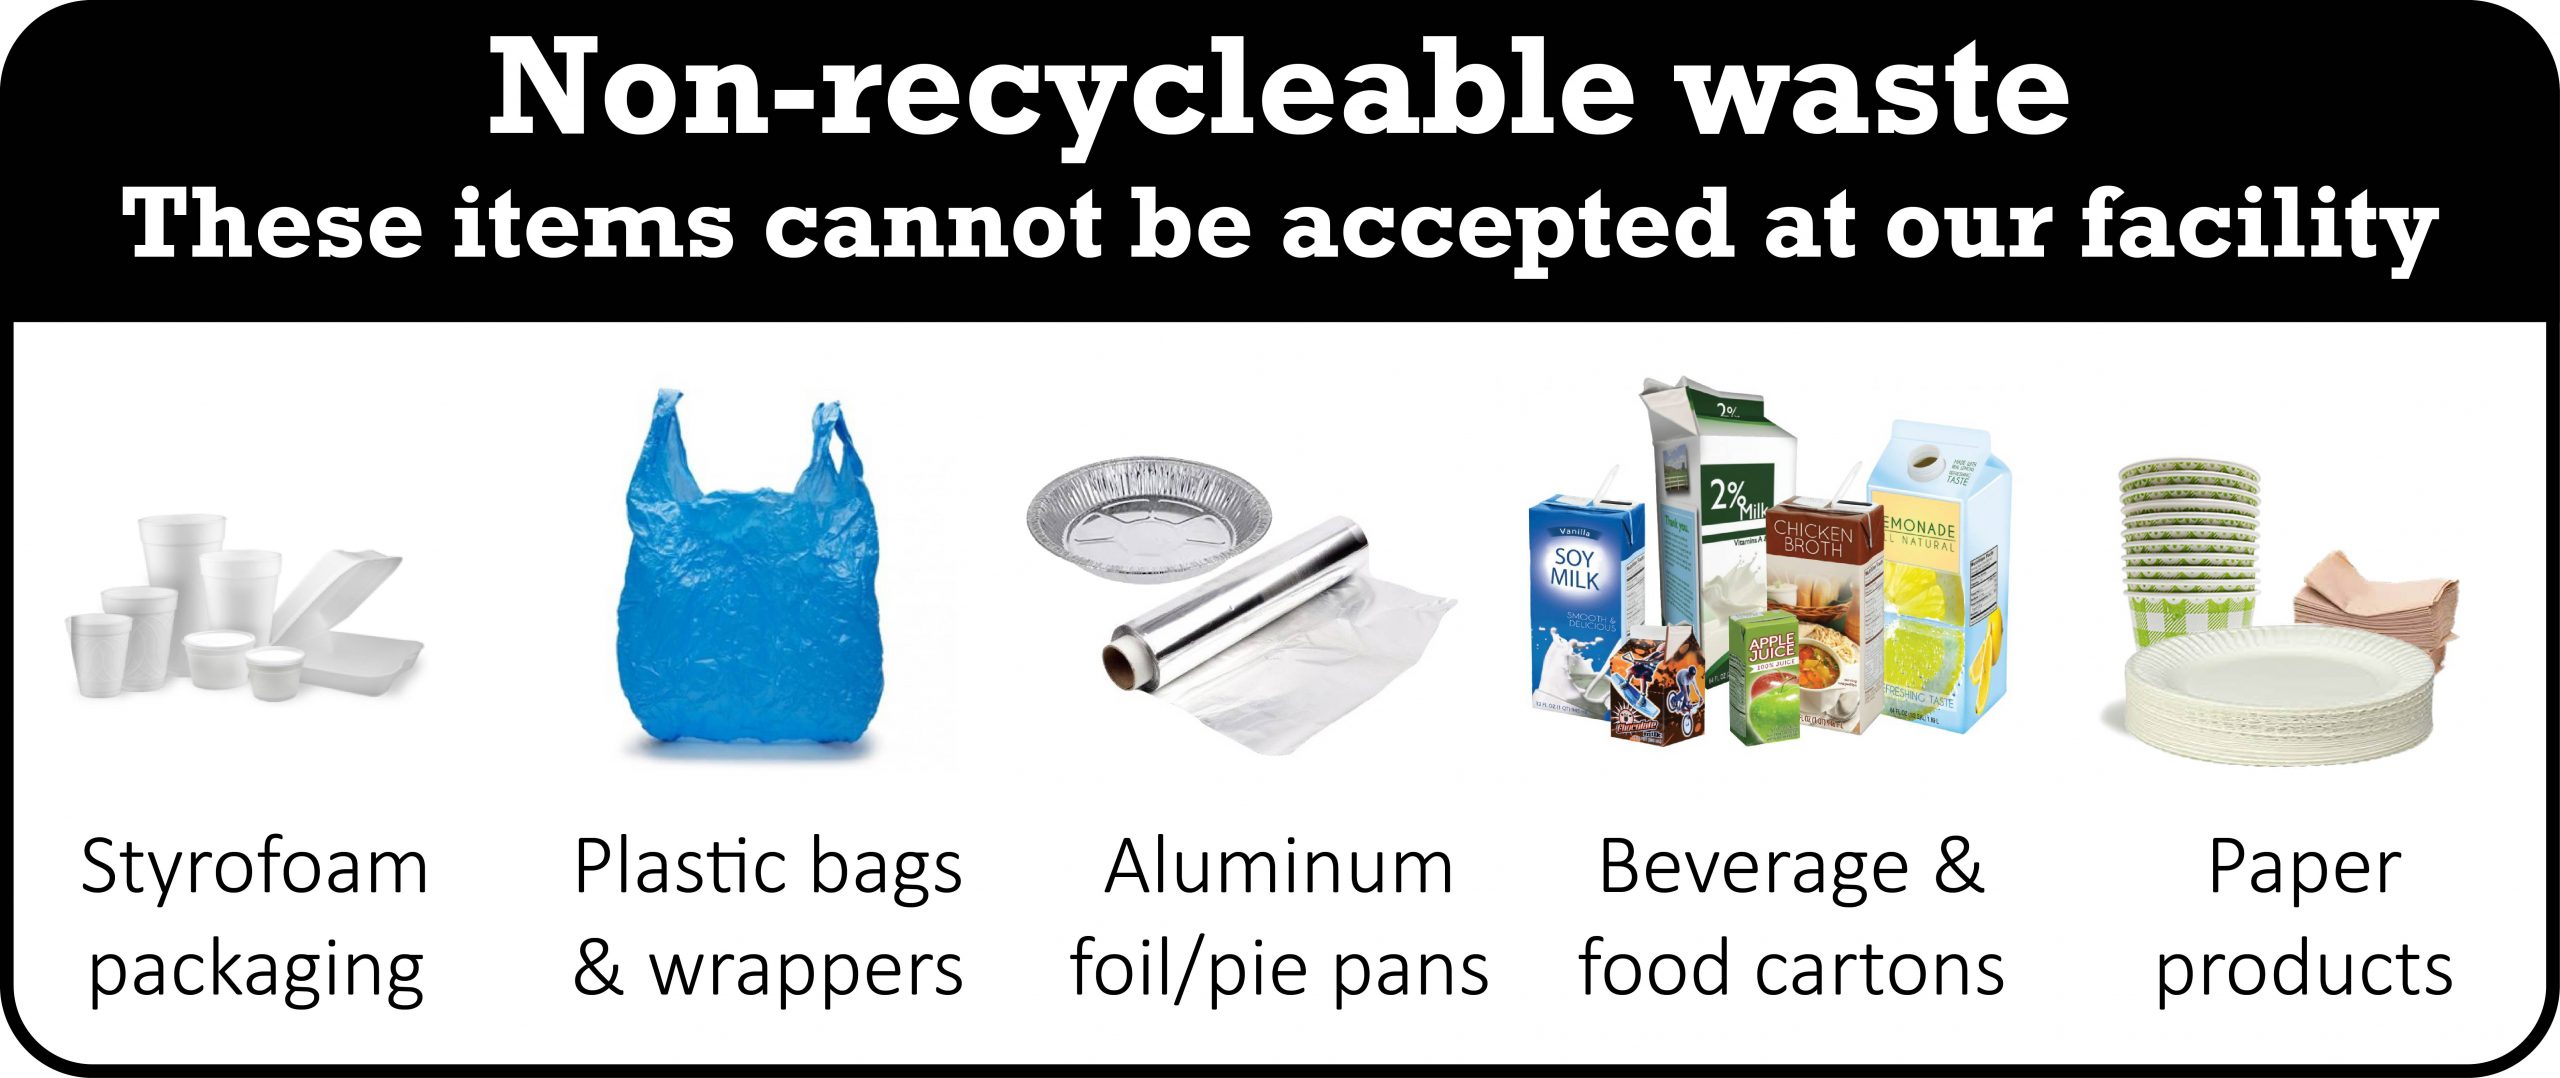 non recyclable waste which includes Styrofoam, plastic bags and wrappers, aluminum foil and pie pans, beverage and food cartons and paper products